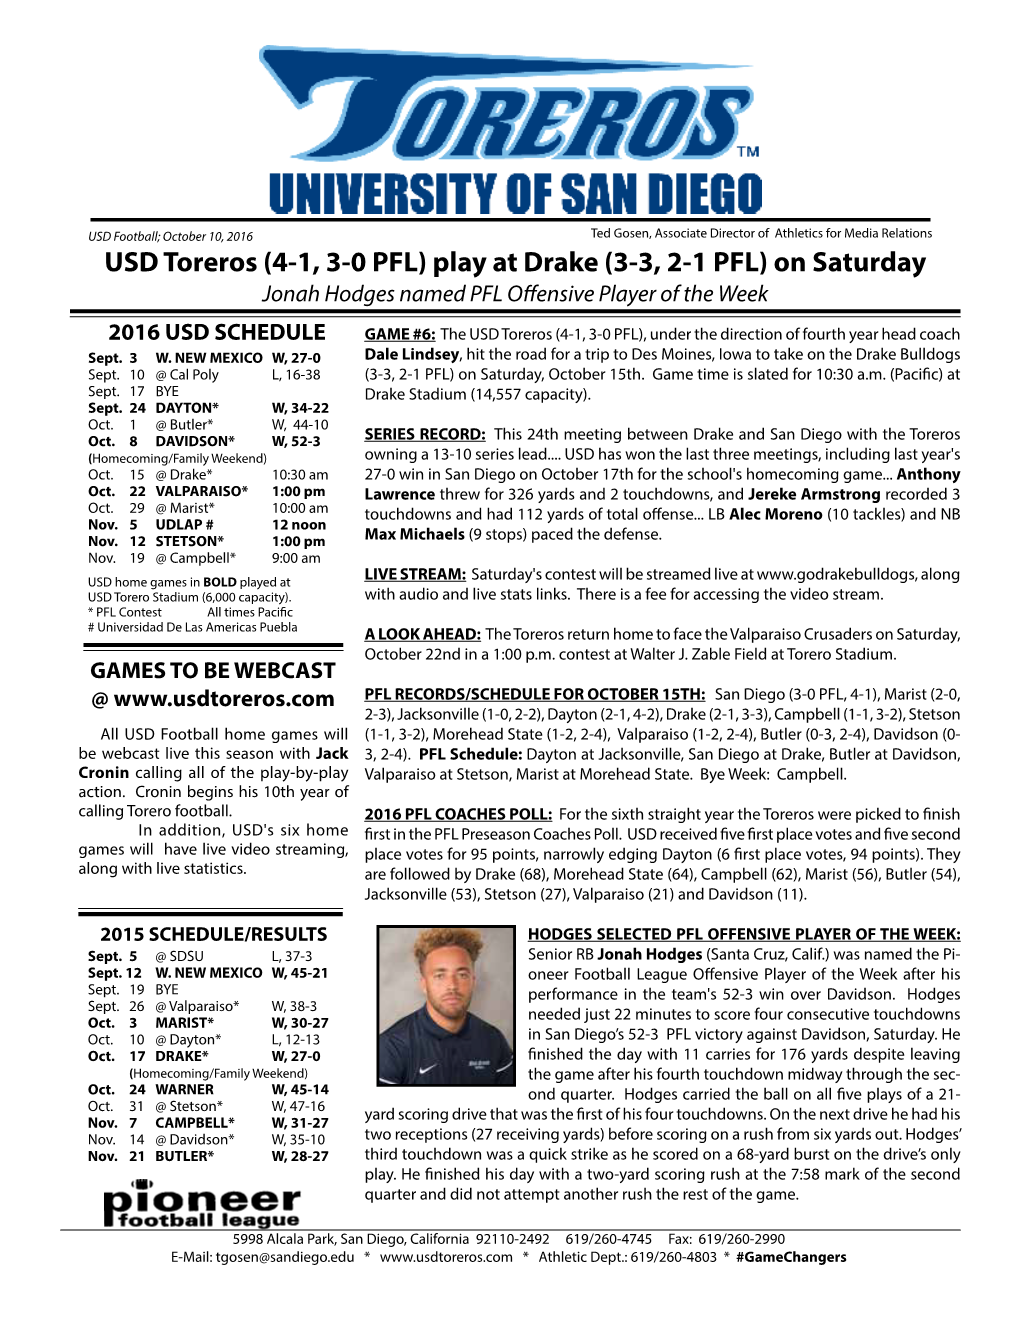 USD Toreros (4-1, 3-0 PFL) Play at Drake (3-3, 2-1 PFL) on Saturday Jonah Hodges Named PFL Offensive Player of the Week